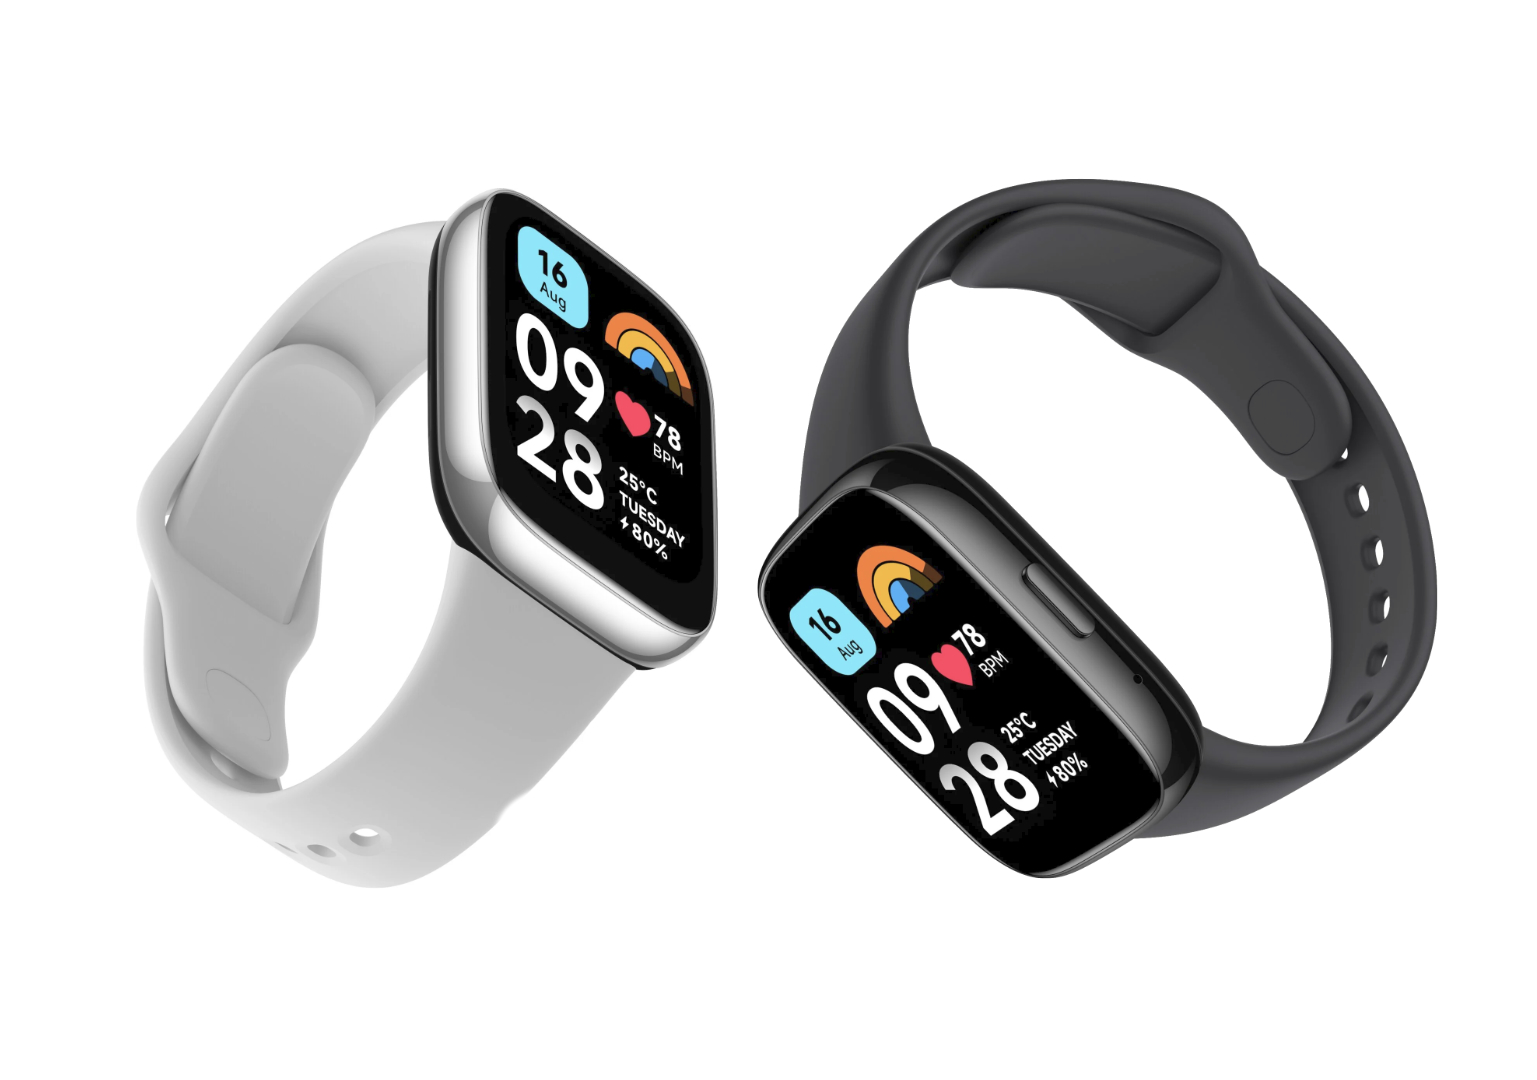 Xiaomi Redmi Watch 3 Active arrives in Europe for €39.99